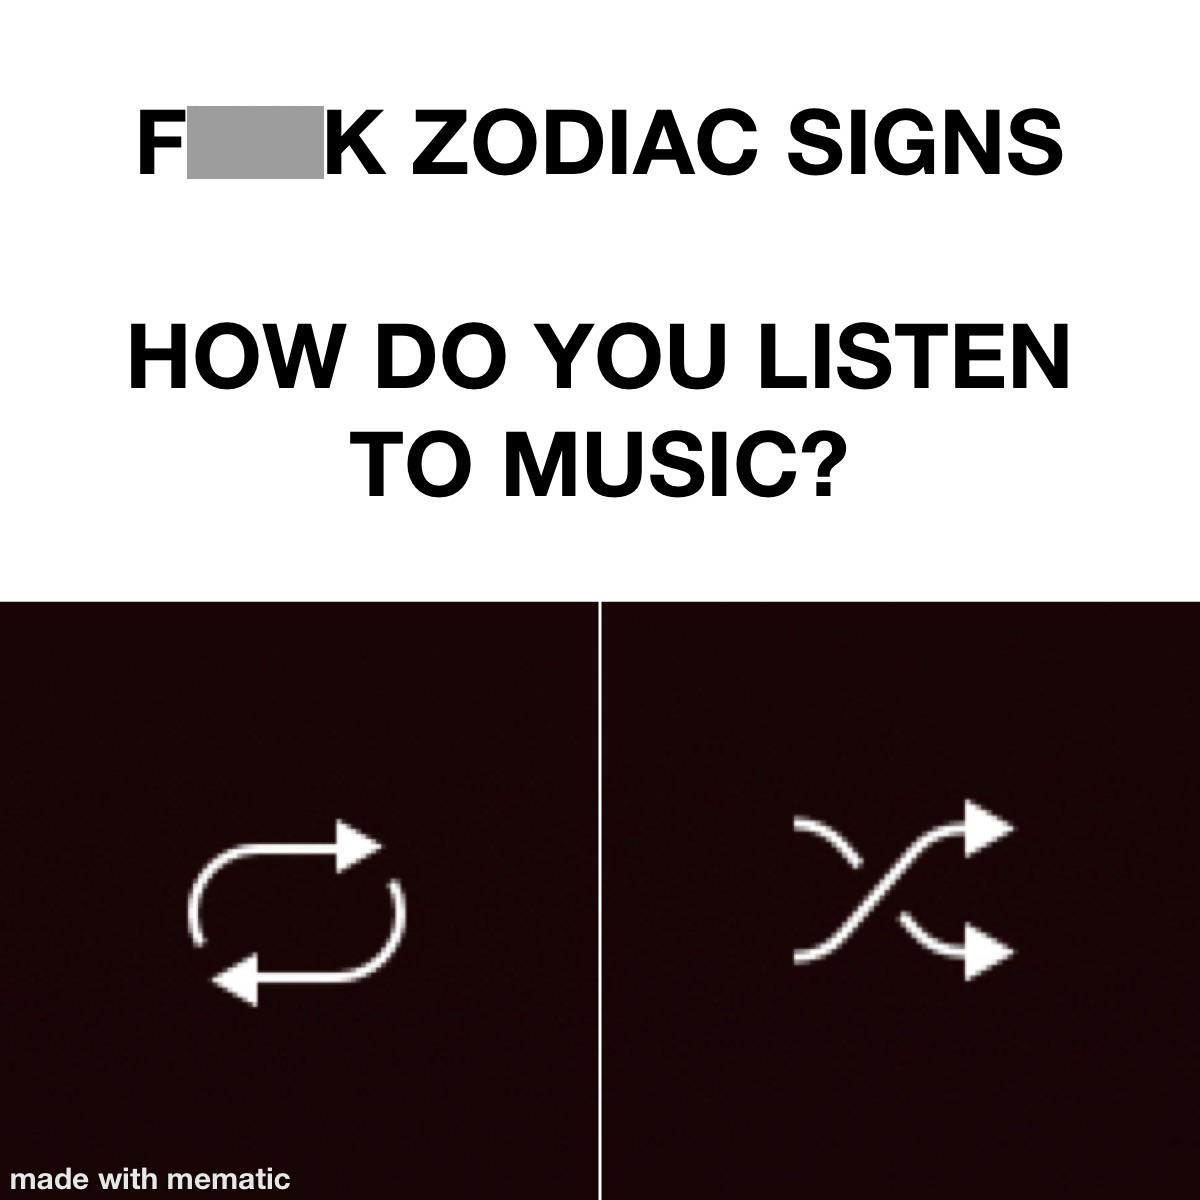 angle - F K Zodiac Signs How Do You Listen To Music? $ X made with mematic